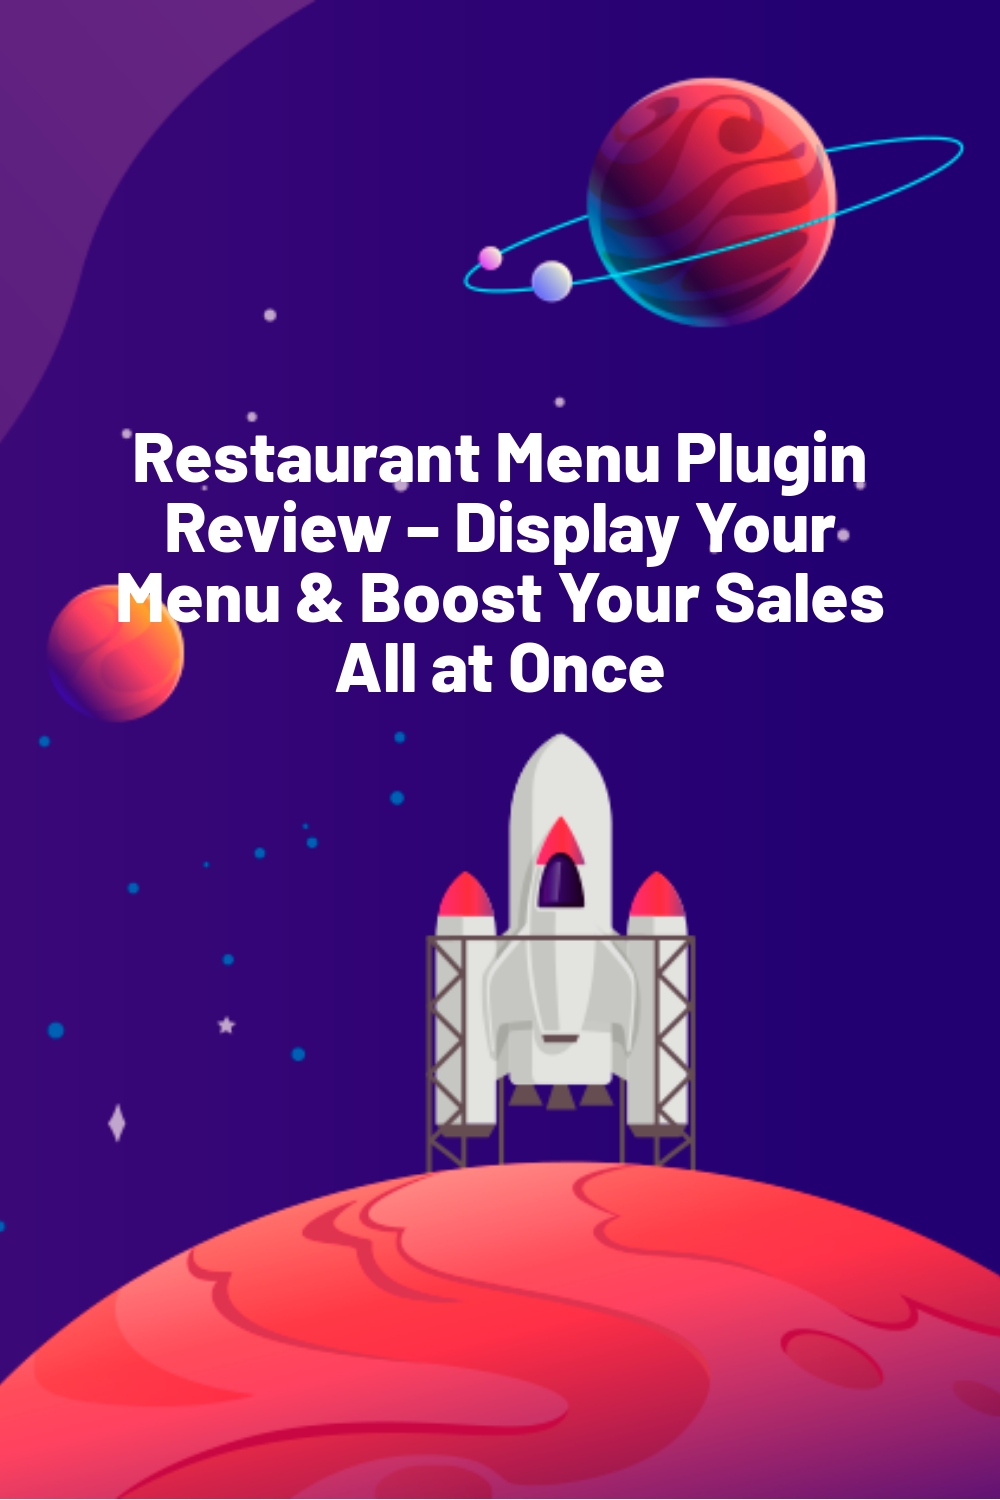 Restaurant Menu Plugin Review – Display Your Menu & Boost Your Sales All at Once